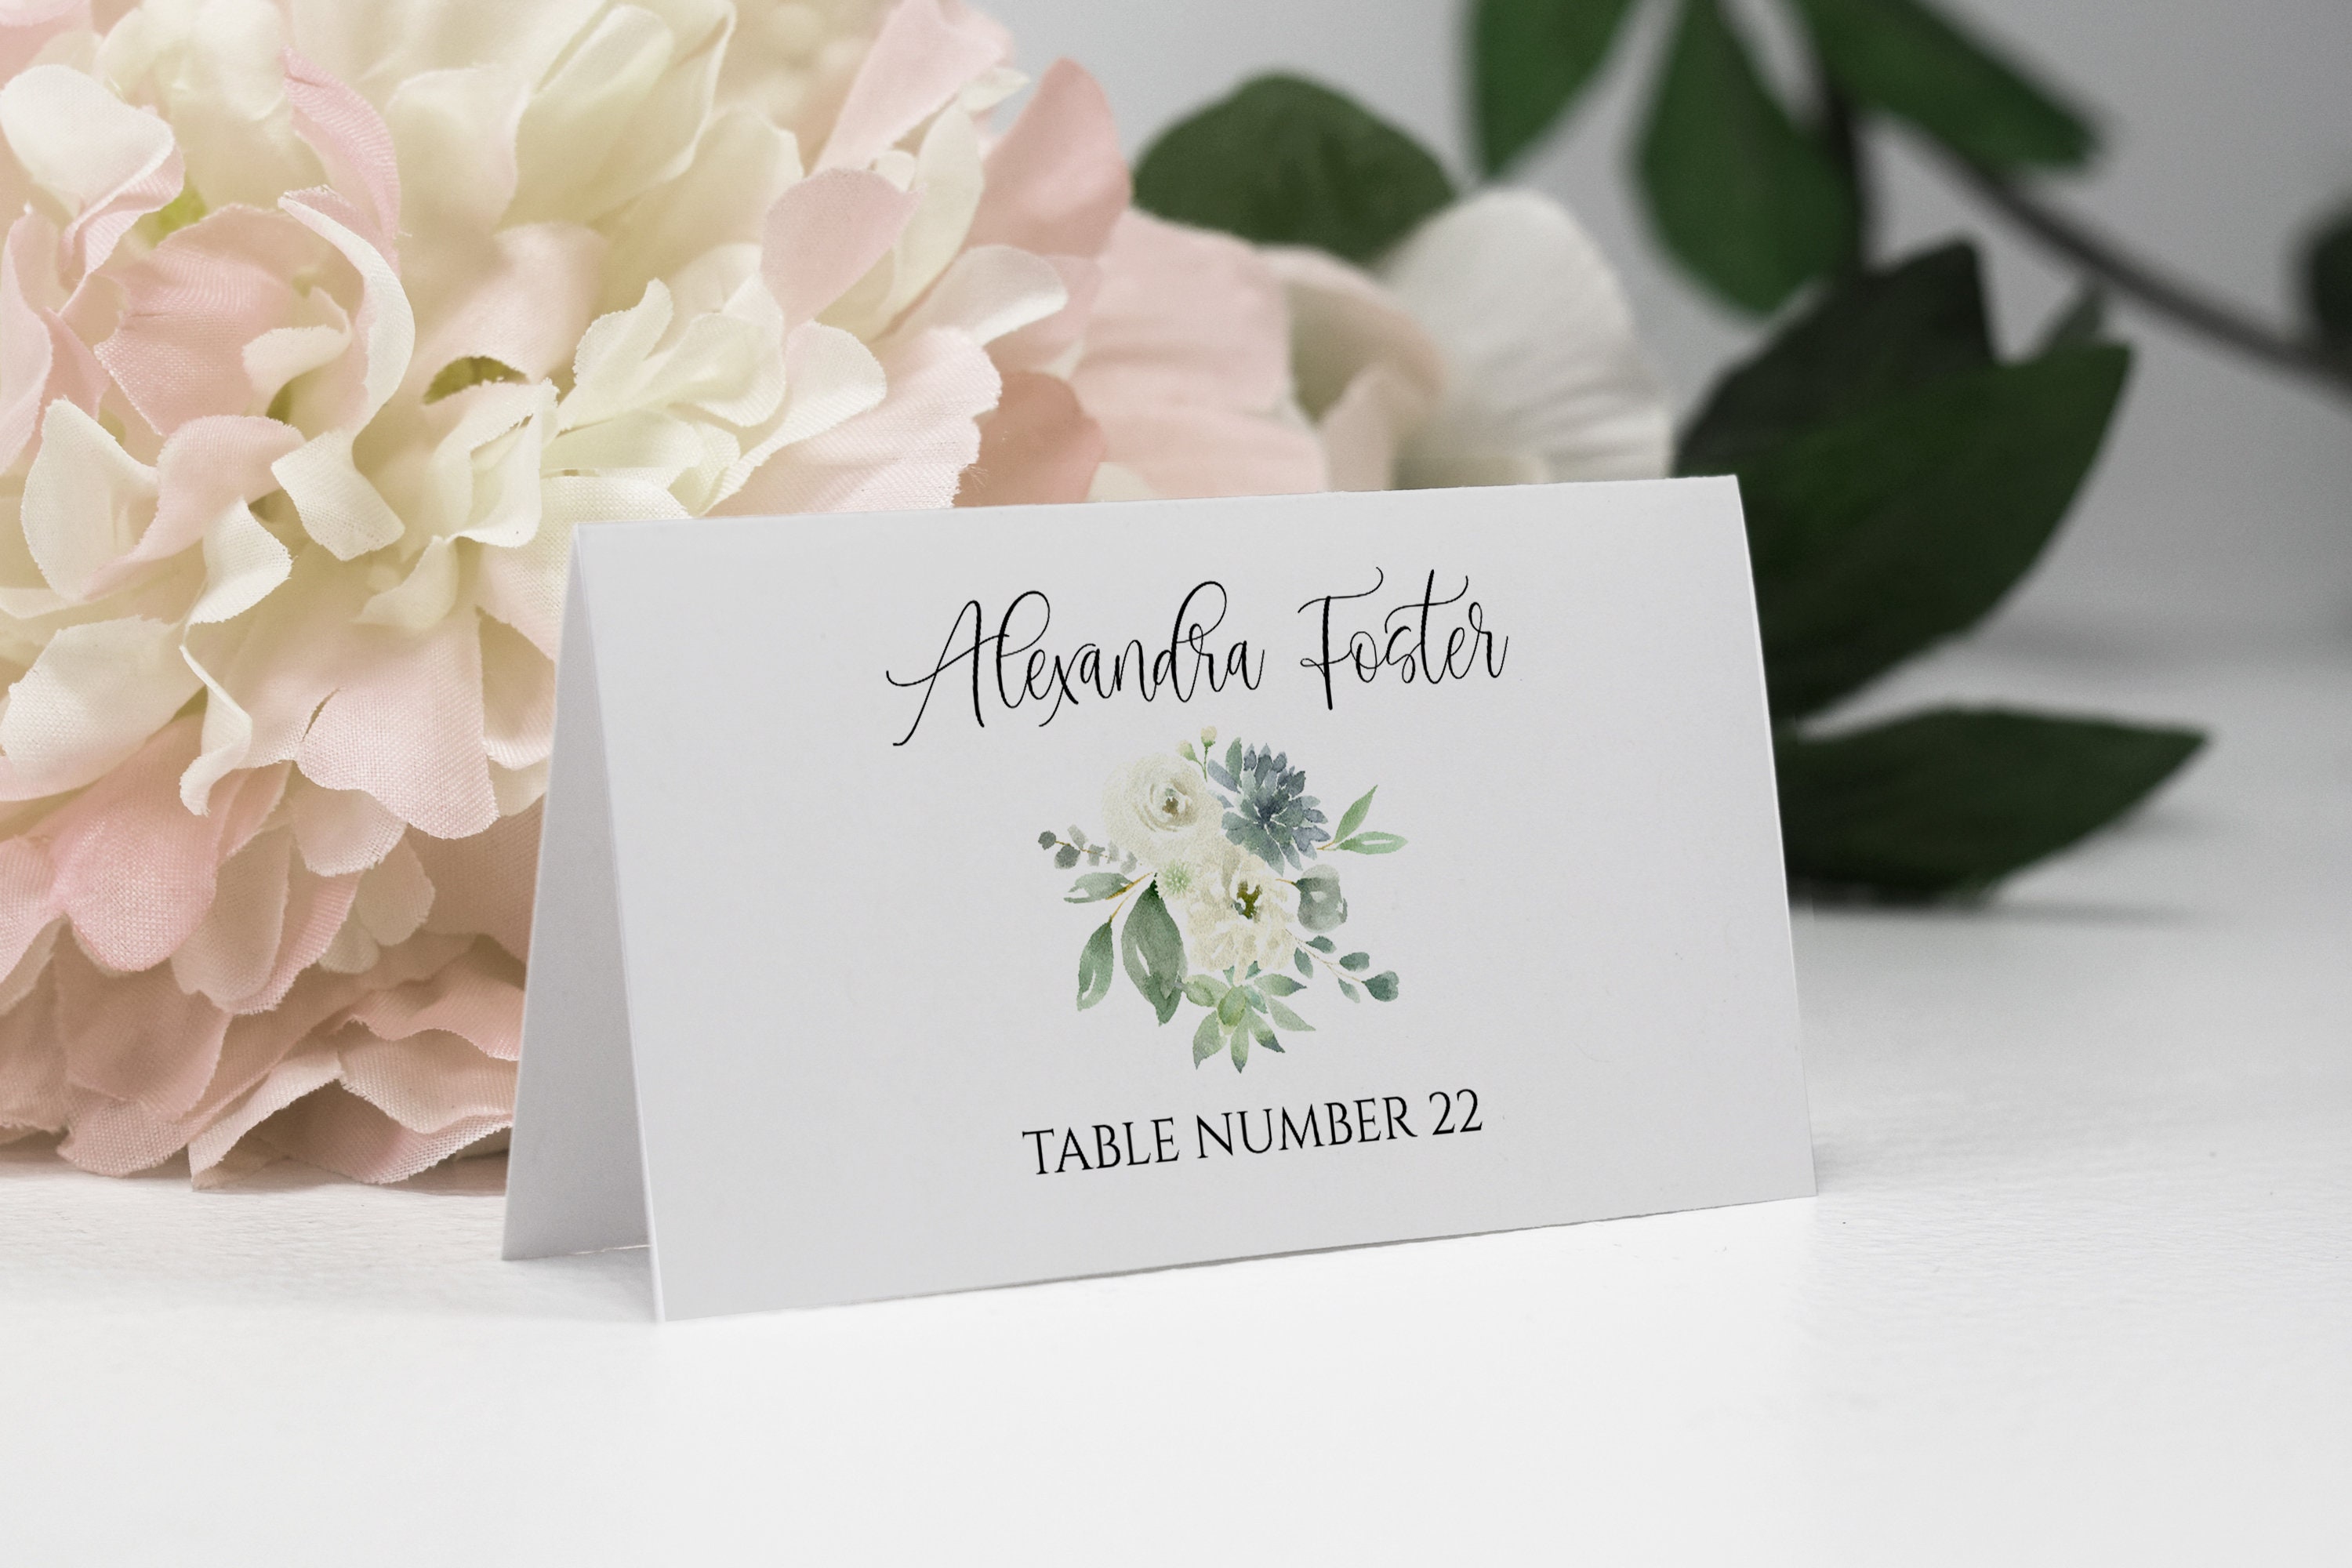 printable-place-card-template-avery-place-card-diy-wedding-etsy